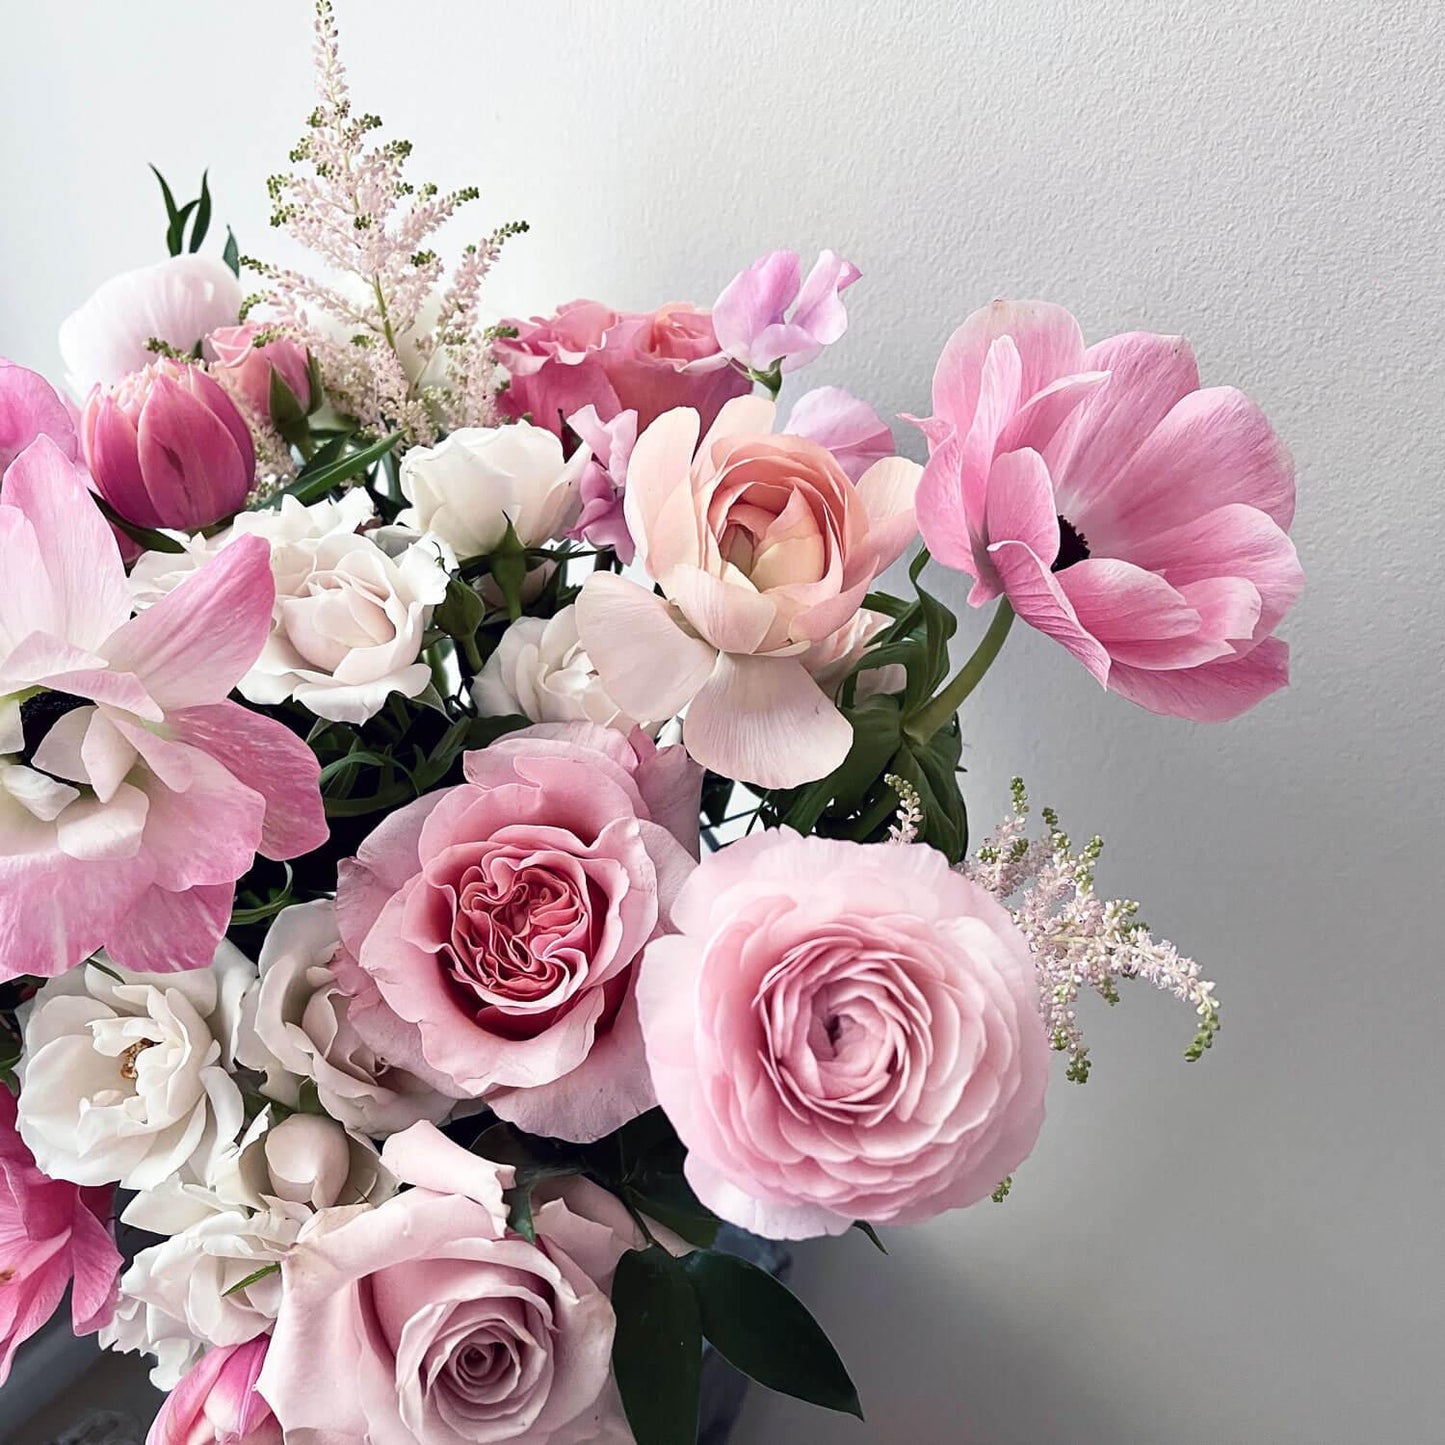 Image of airy pastel pink and delicate cream flowers, evoking a sweet and gender non-binary color story.Order online for same-day flower delivery from Toronto's best florist, available near you.